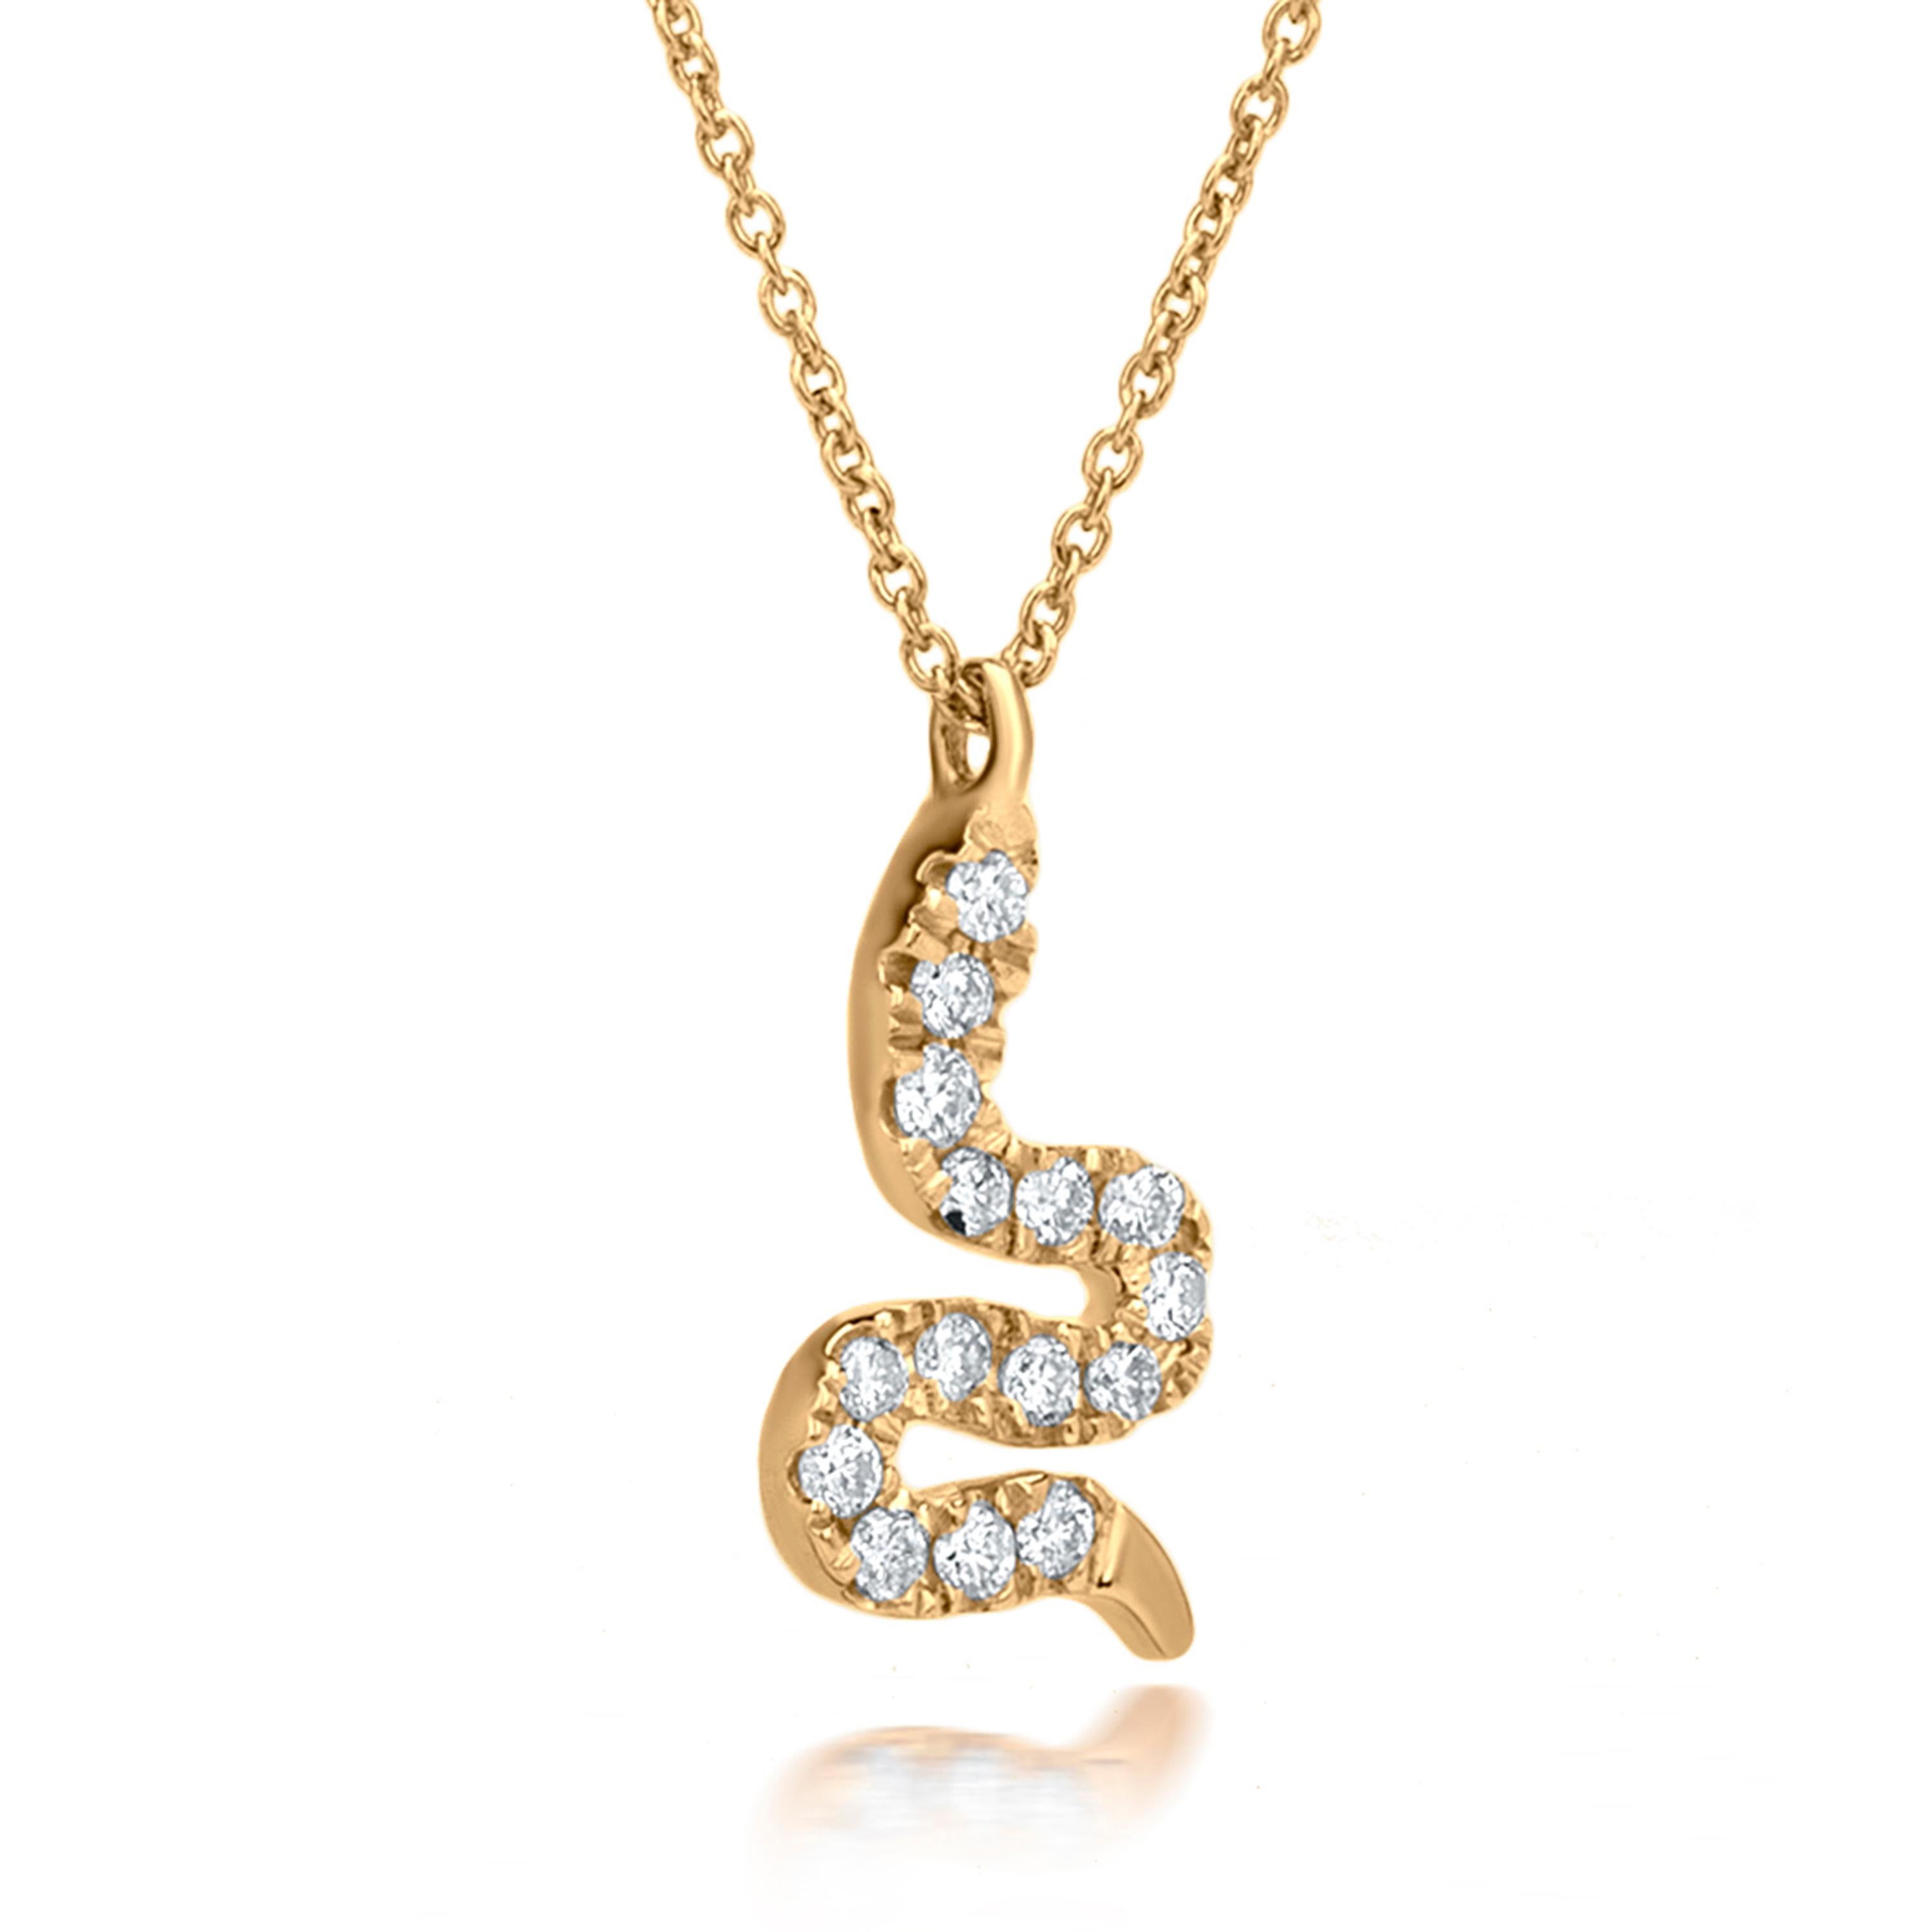 Contemporary Luxle Snake Diamond Pendant Necklace in 18k Yellow Gold